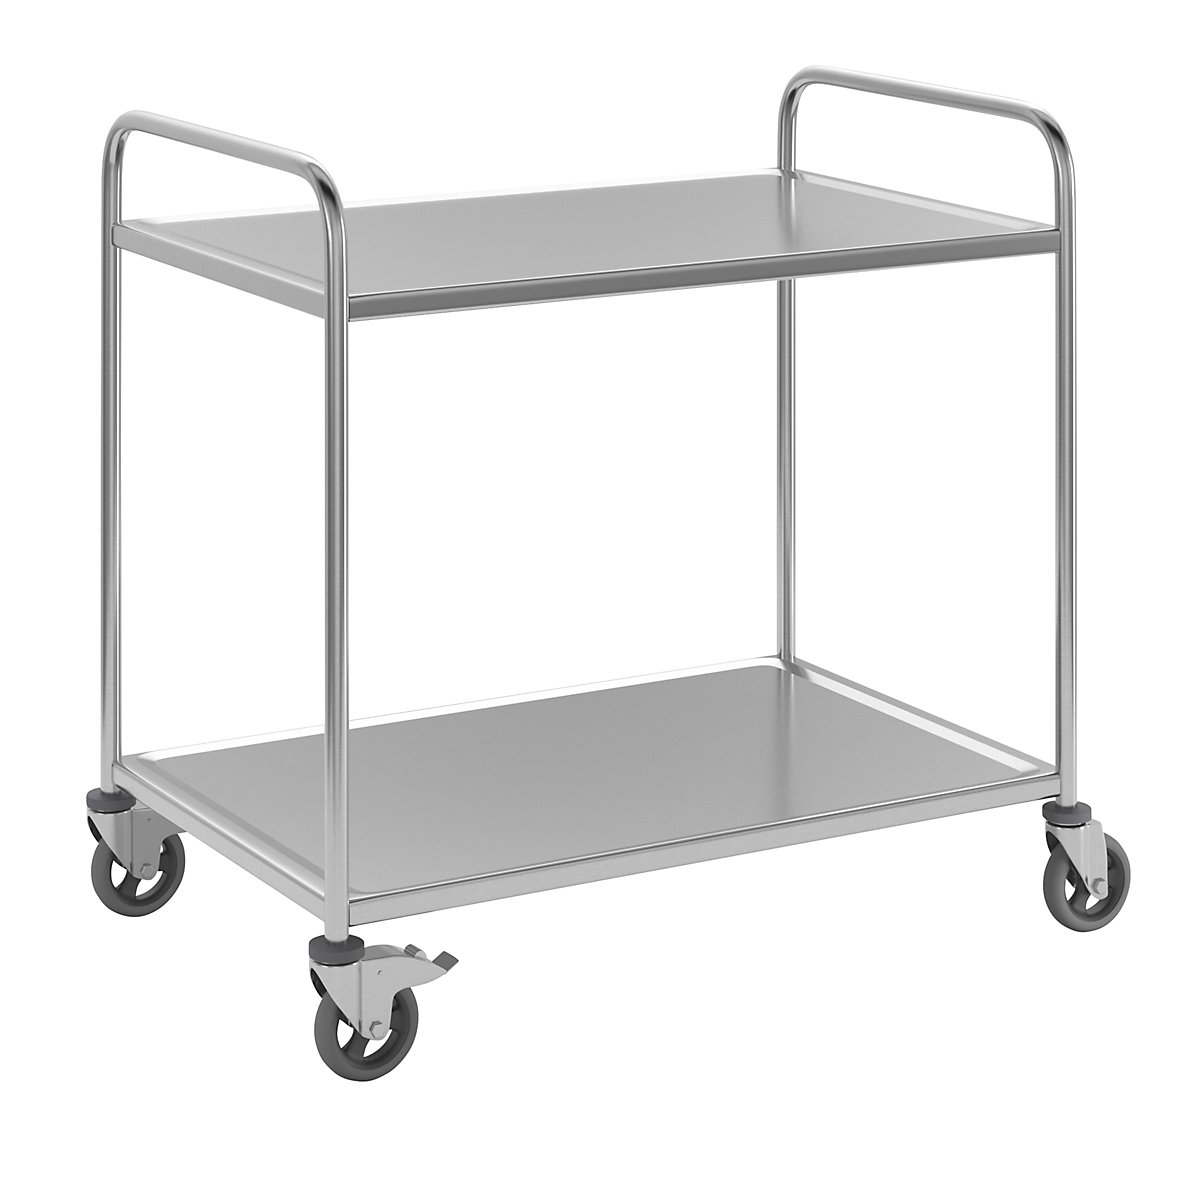 Stainless steel serving trolley, 2 shelves, air cushioned tyres, LxWxH 1070 x 670 x 970 mm-4